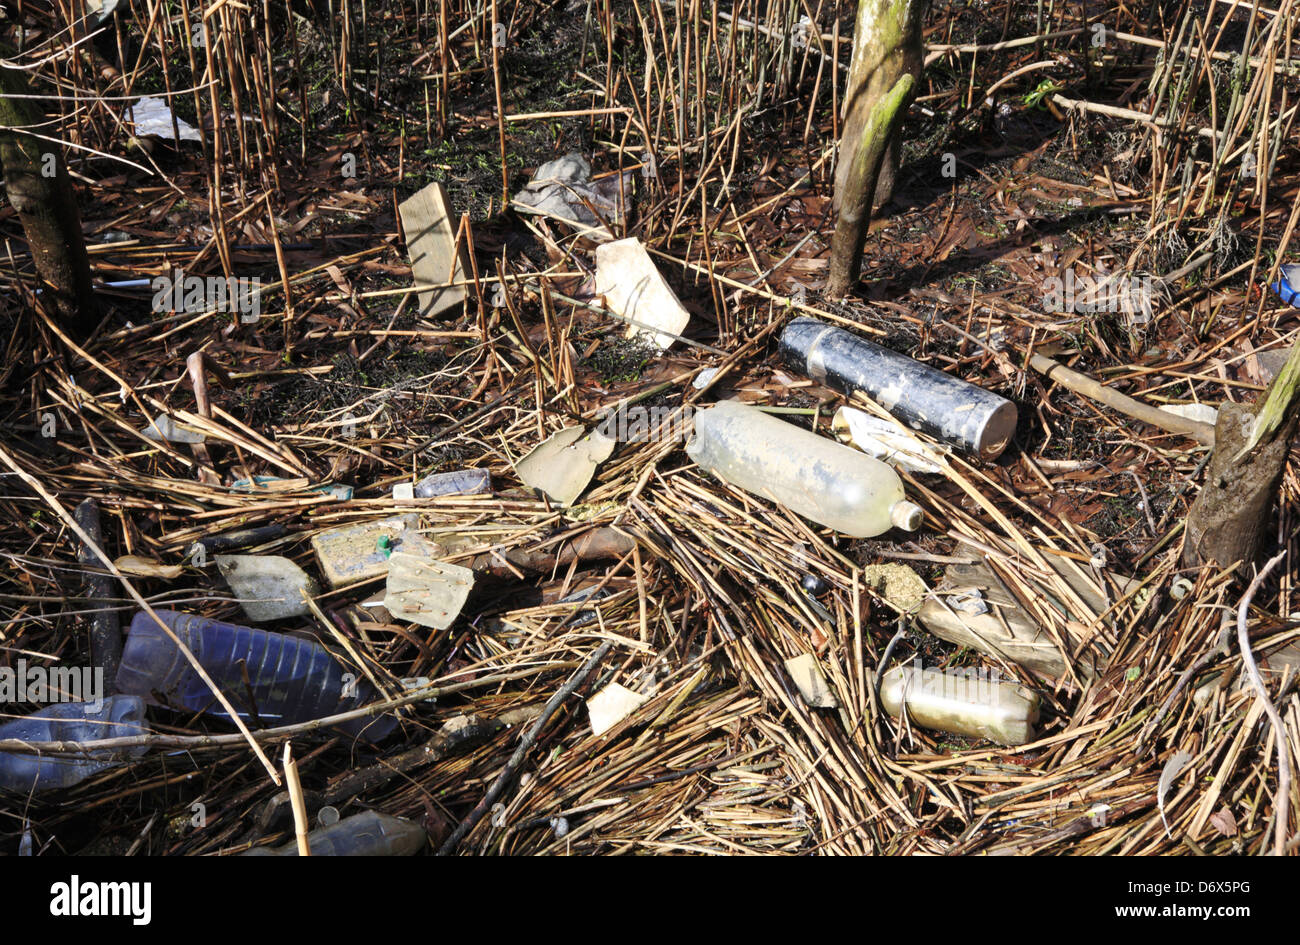 Discarded waste materials accumulating by the bank of the River Yare at Surlingham, Norfolk, England, United Kingdom. Stock Photo